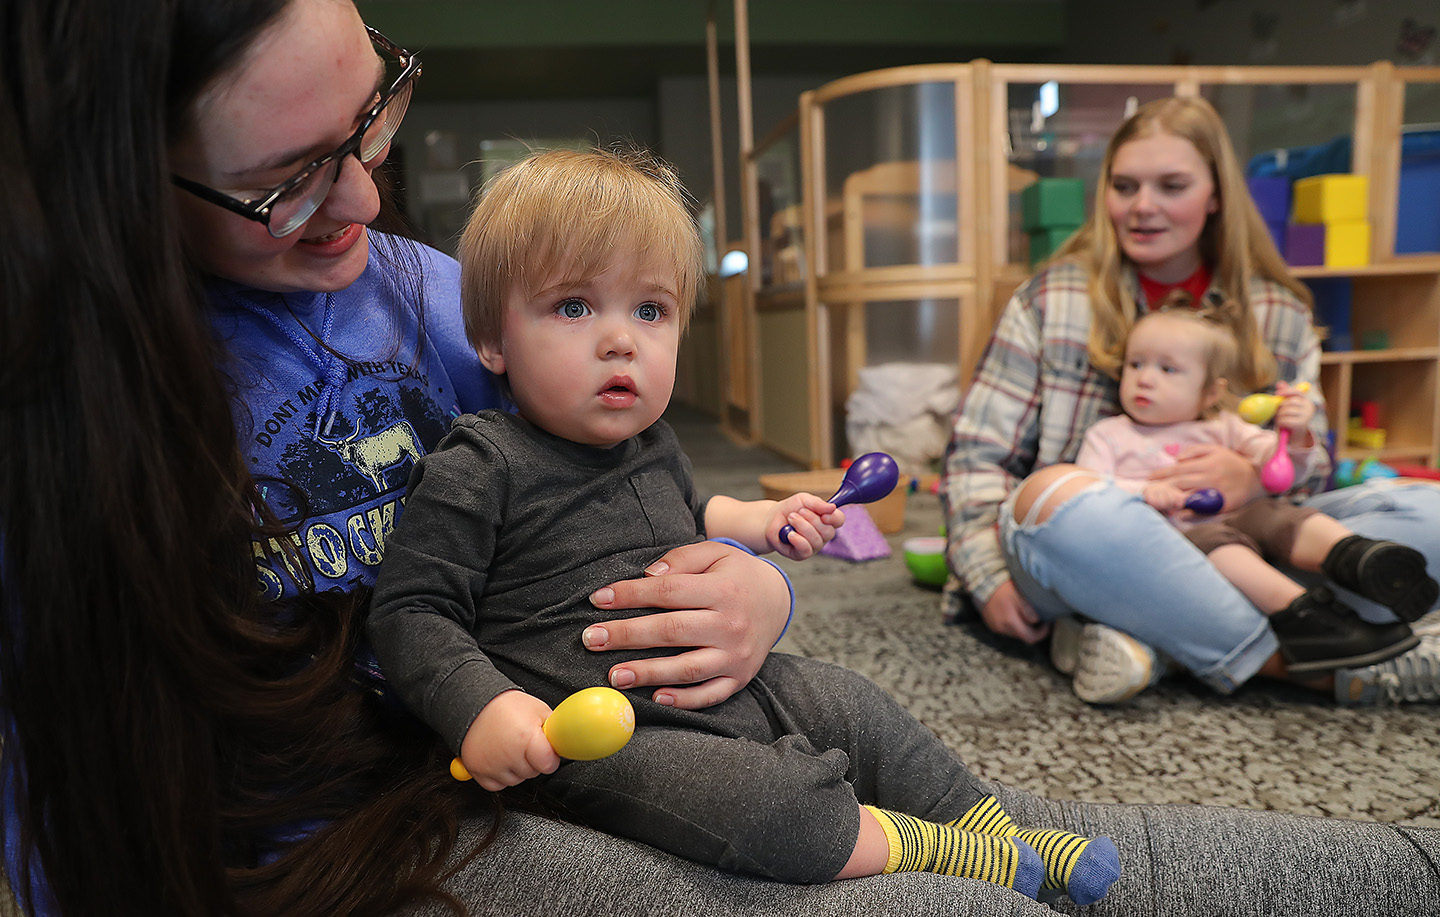 The Plambeck Early Childhood Education Center serves as a lab school for UNK students, who work directly with children and participate in observations, practicums, diagnostic testing, research and other experiential learning opportunities.